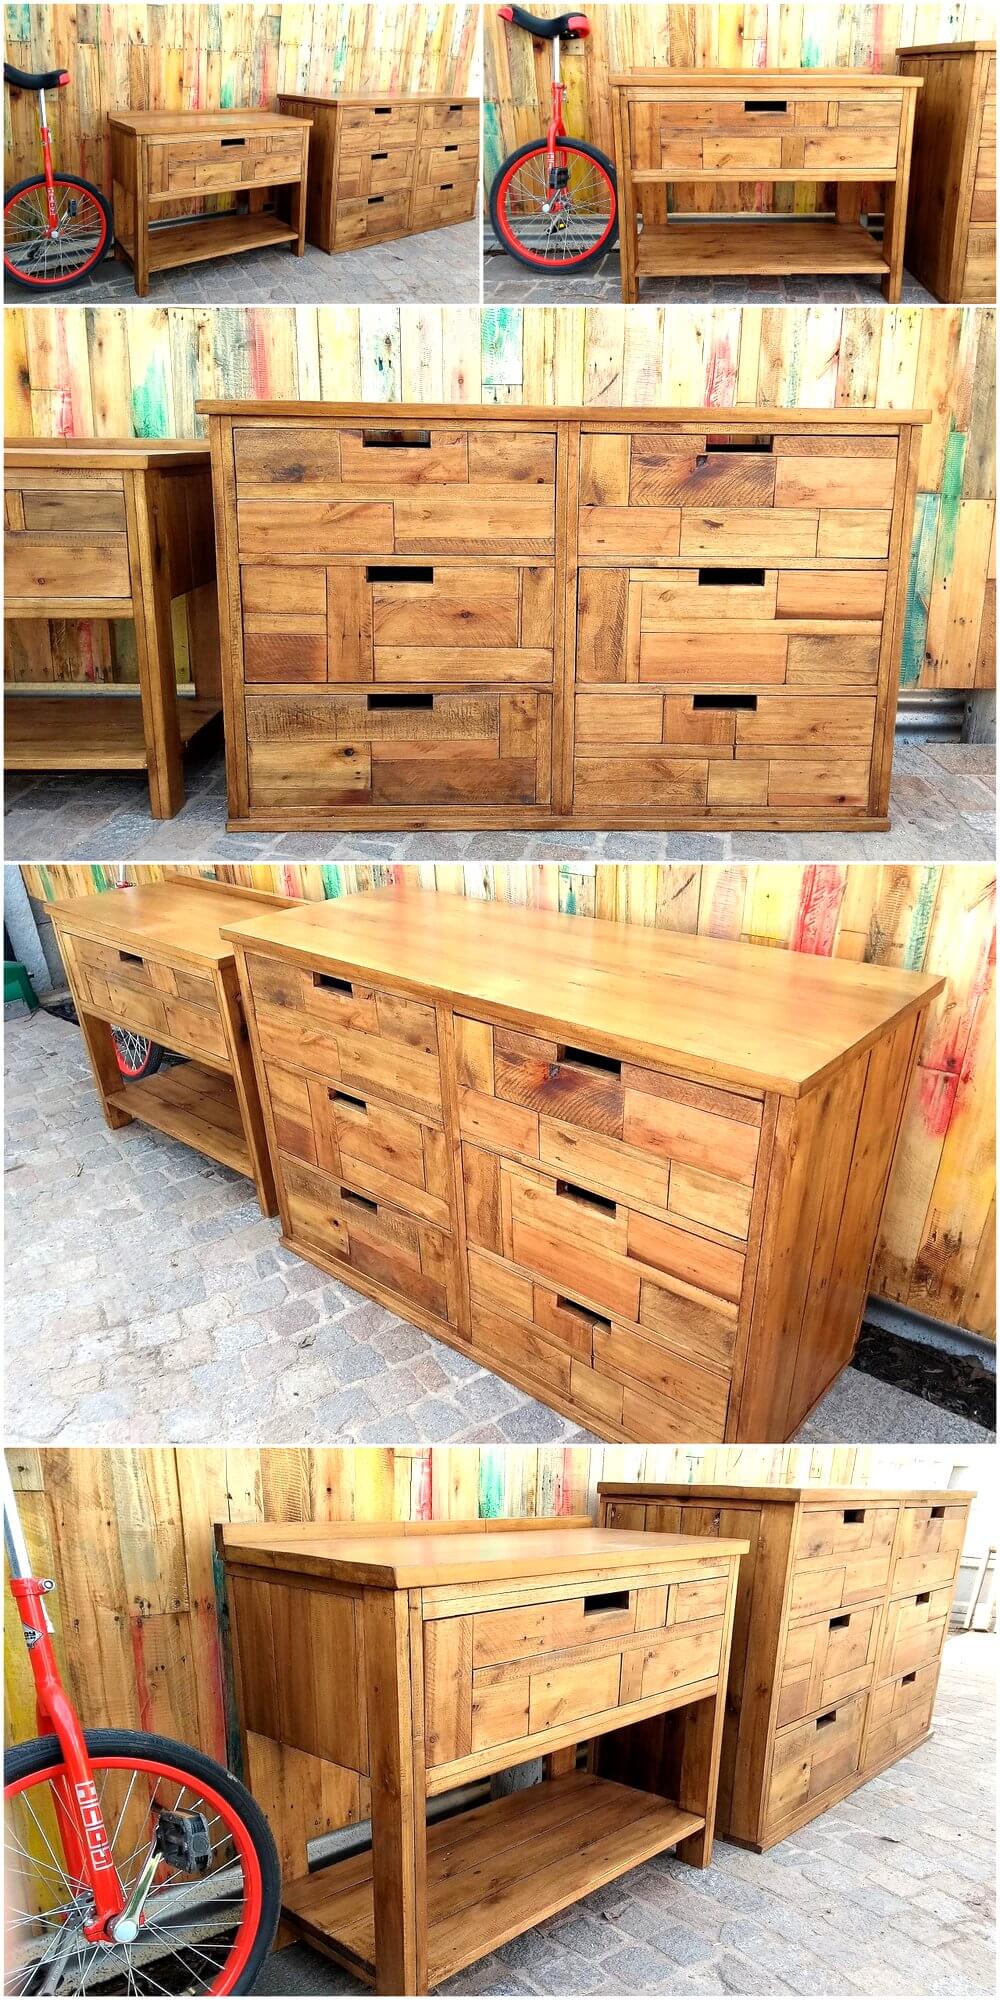 Wooden Pallets Made Dresser with Side Table | Wood Pallet ...